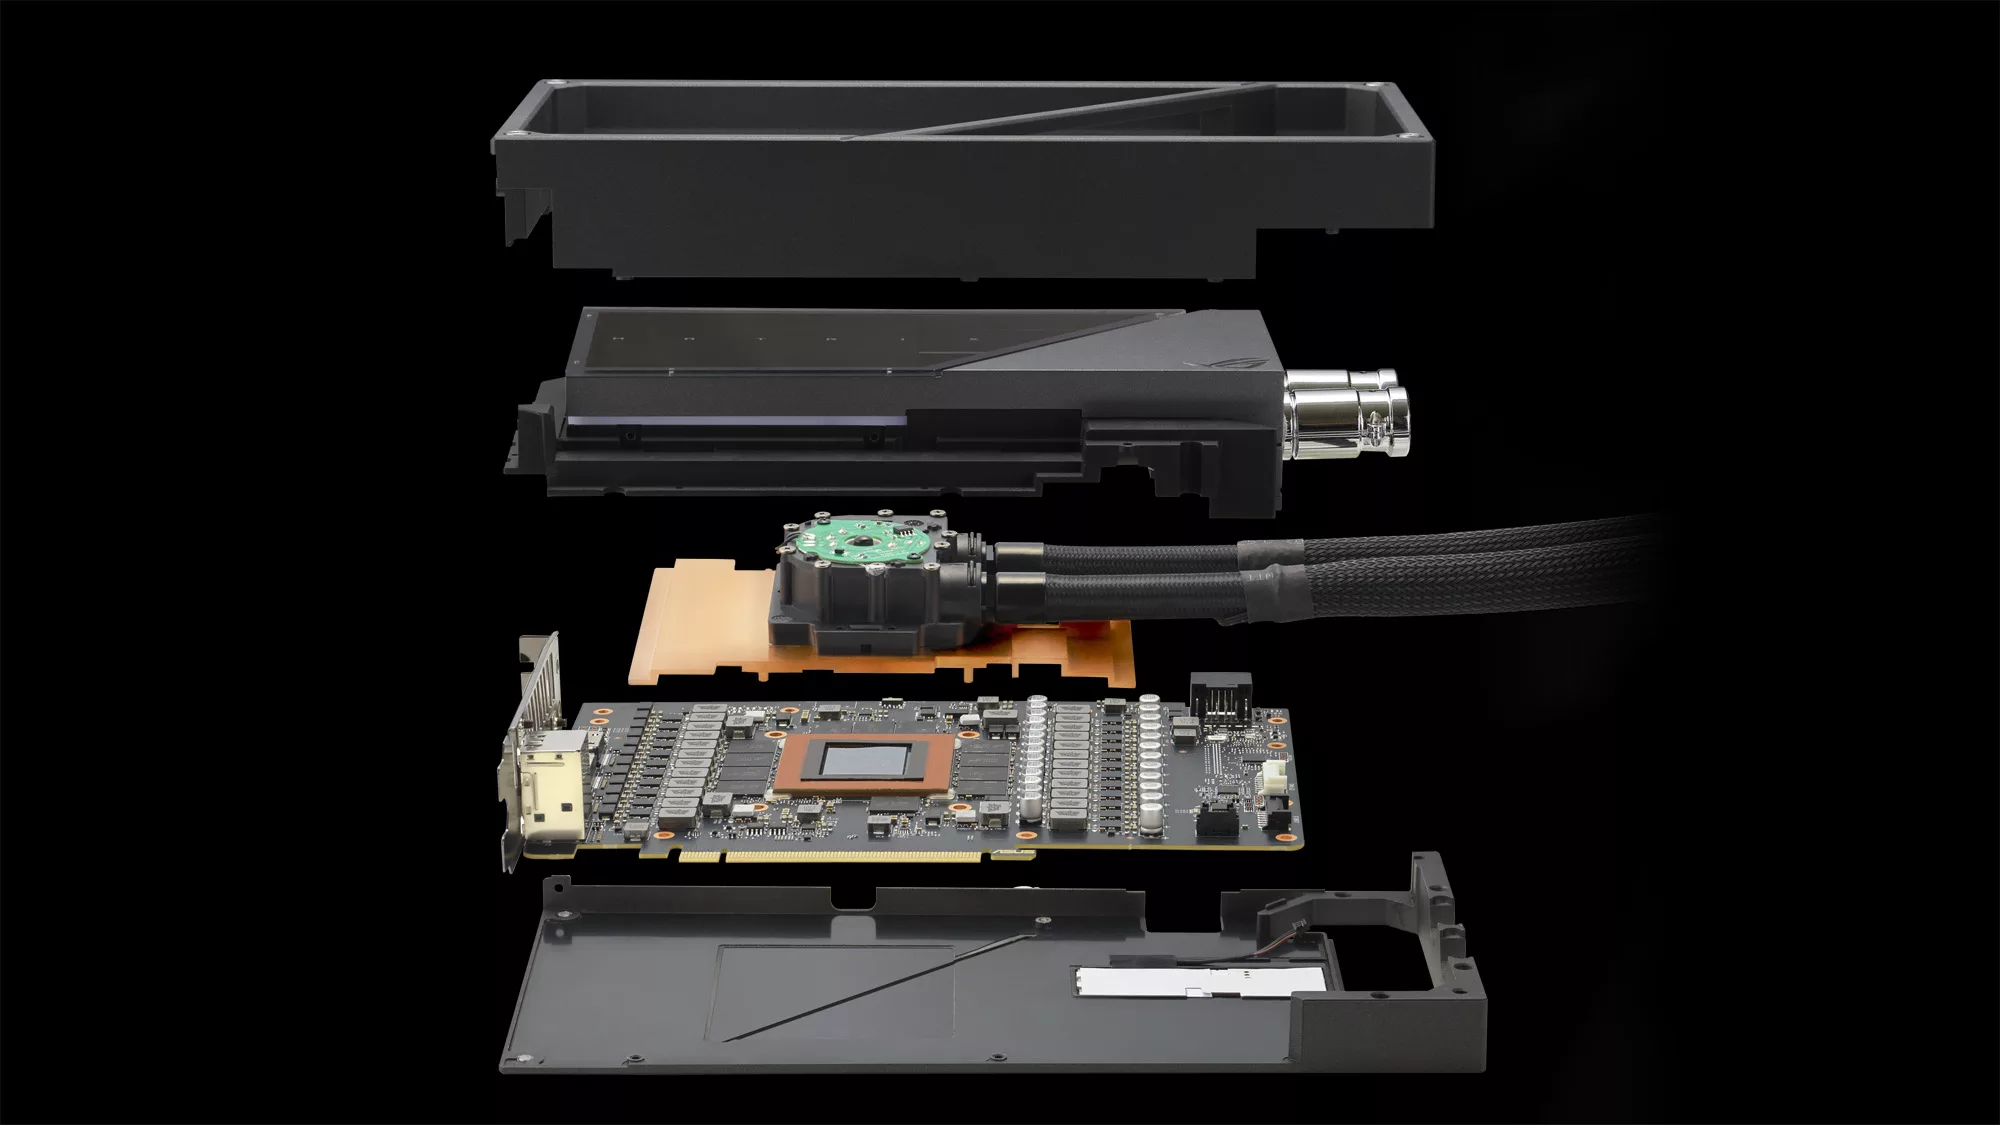 An exploded view of the ROG Matrix GeForce RTX 4090 graphics card.